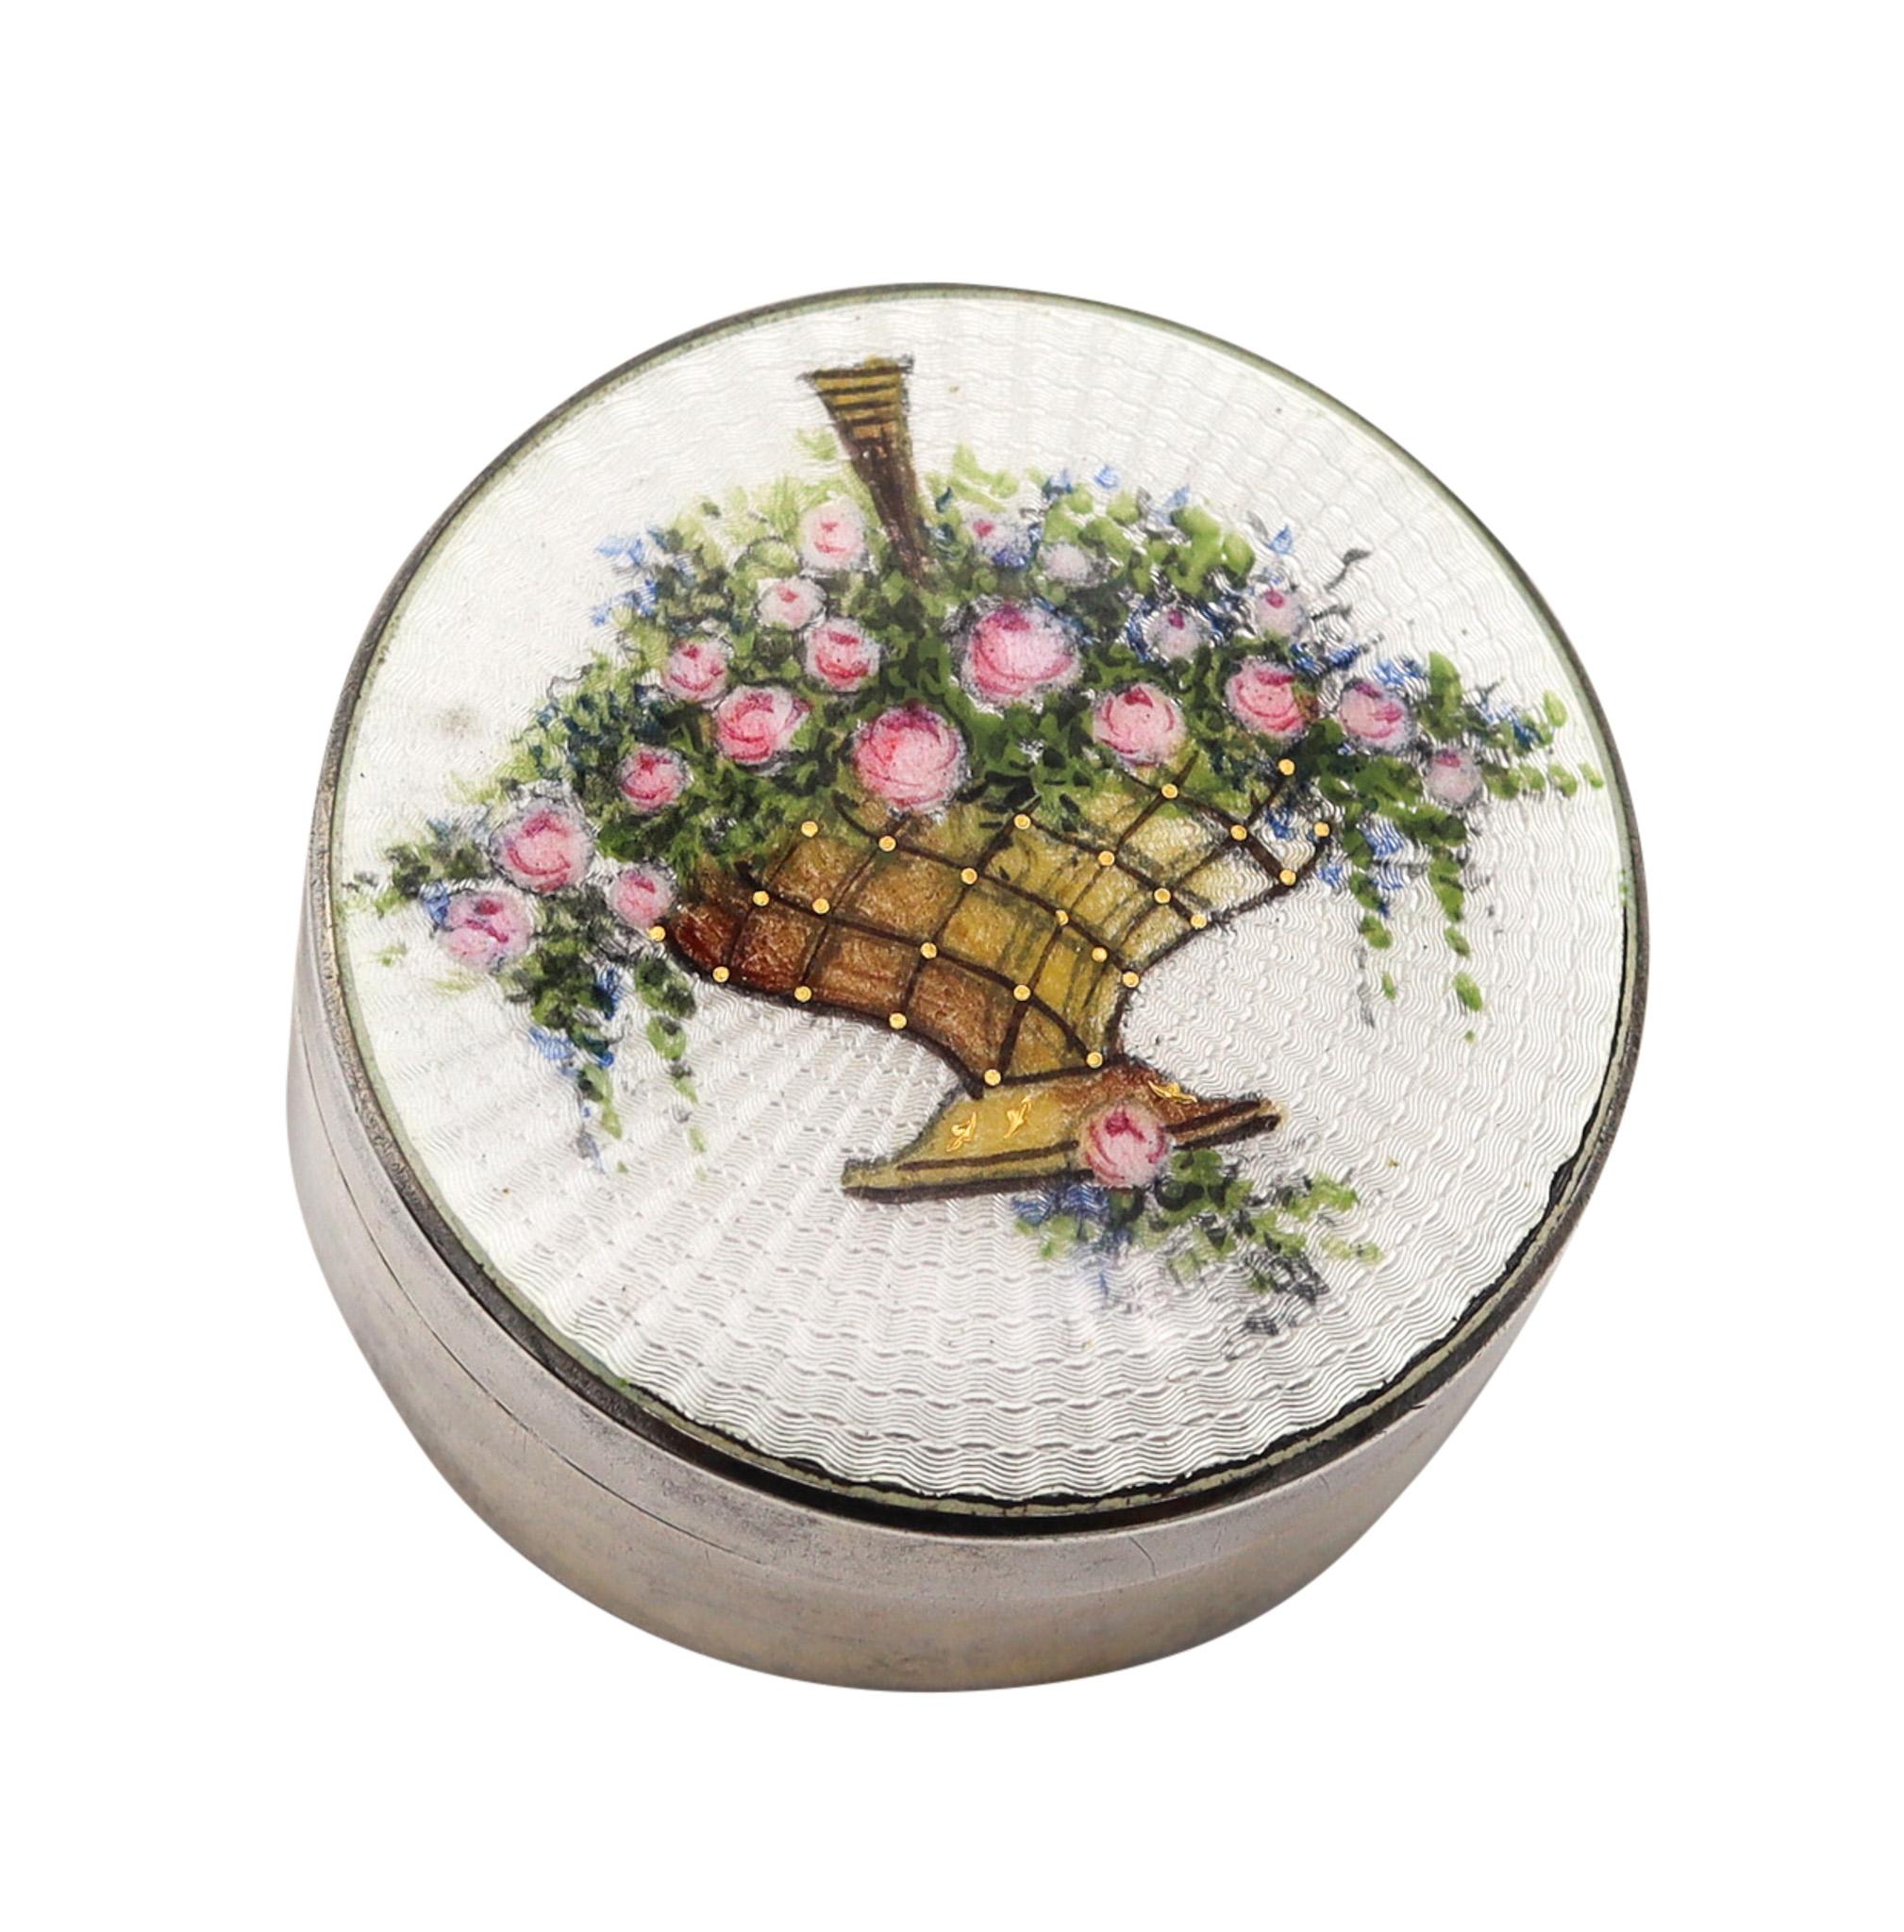 R. Blackinton 1910 Edwardian Enameled Round Box In .925 Sterling Silver For Sale